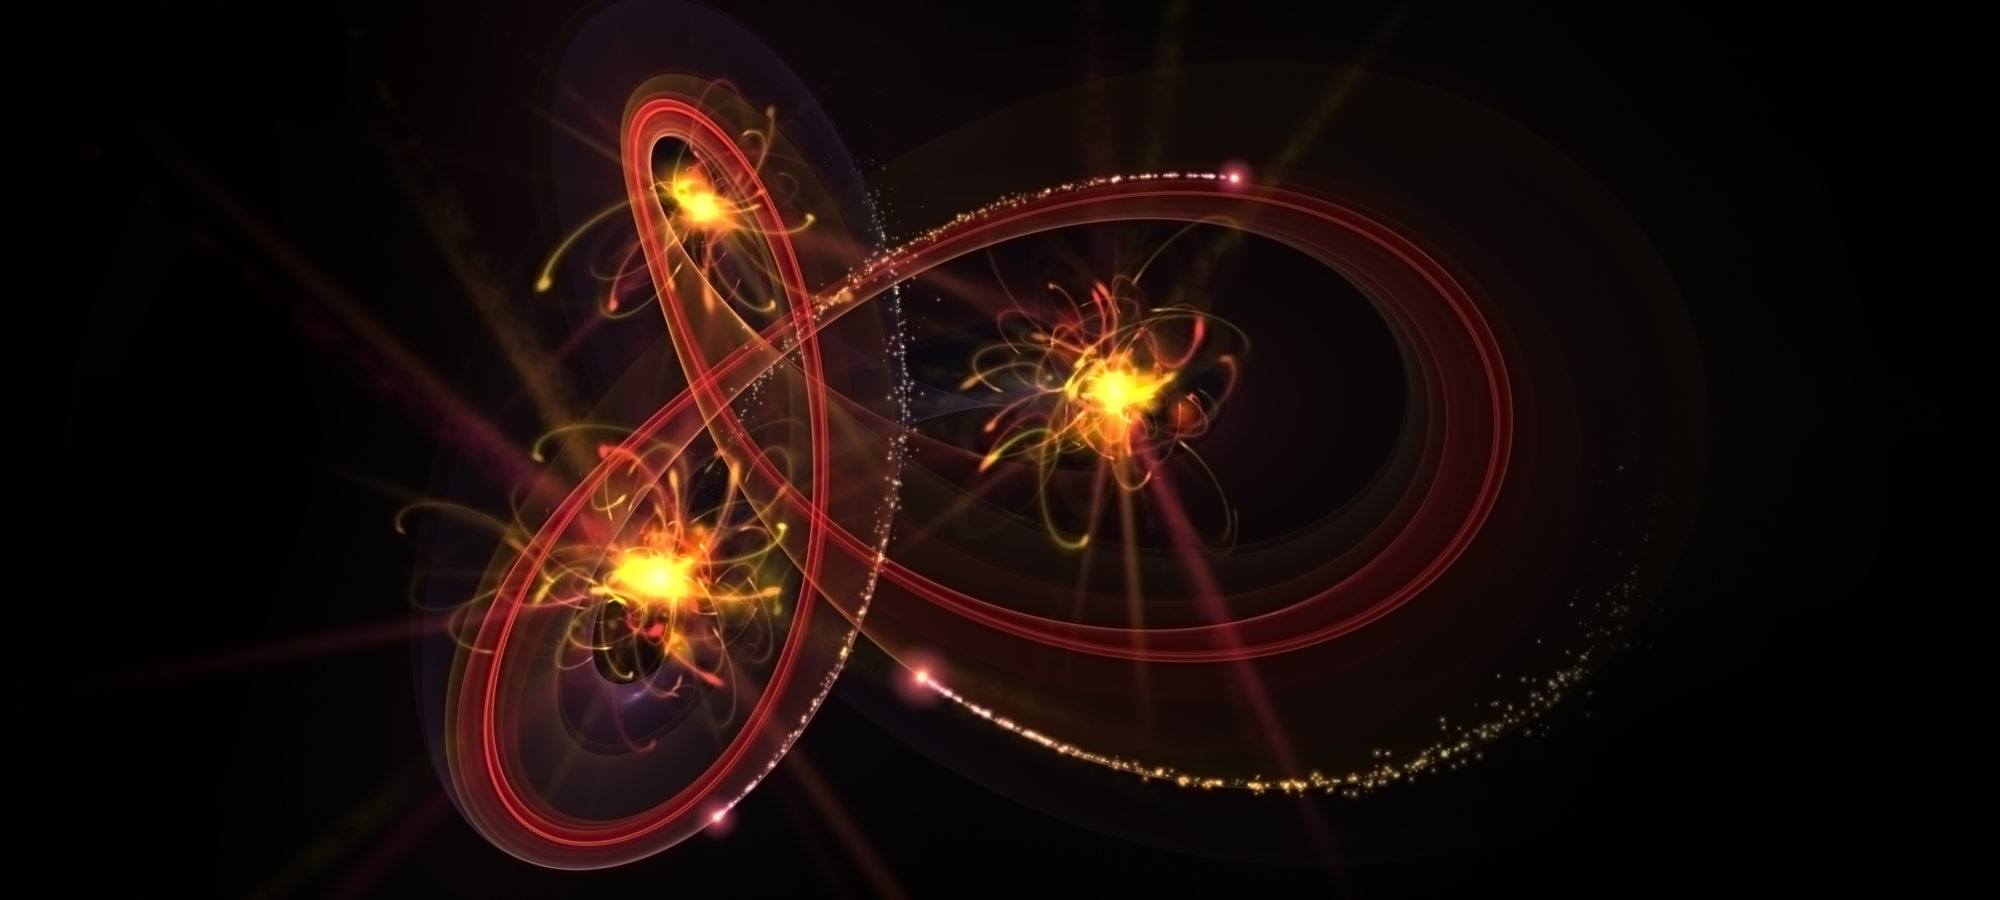 Abstract image of three light sources connected with red lines and swirls